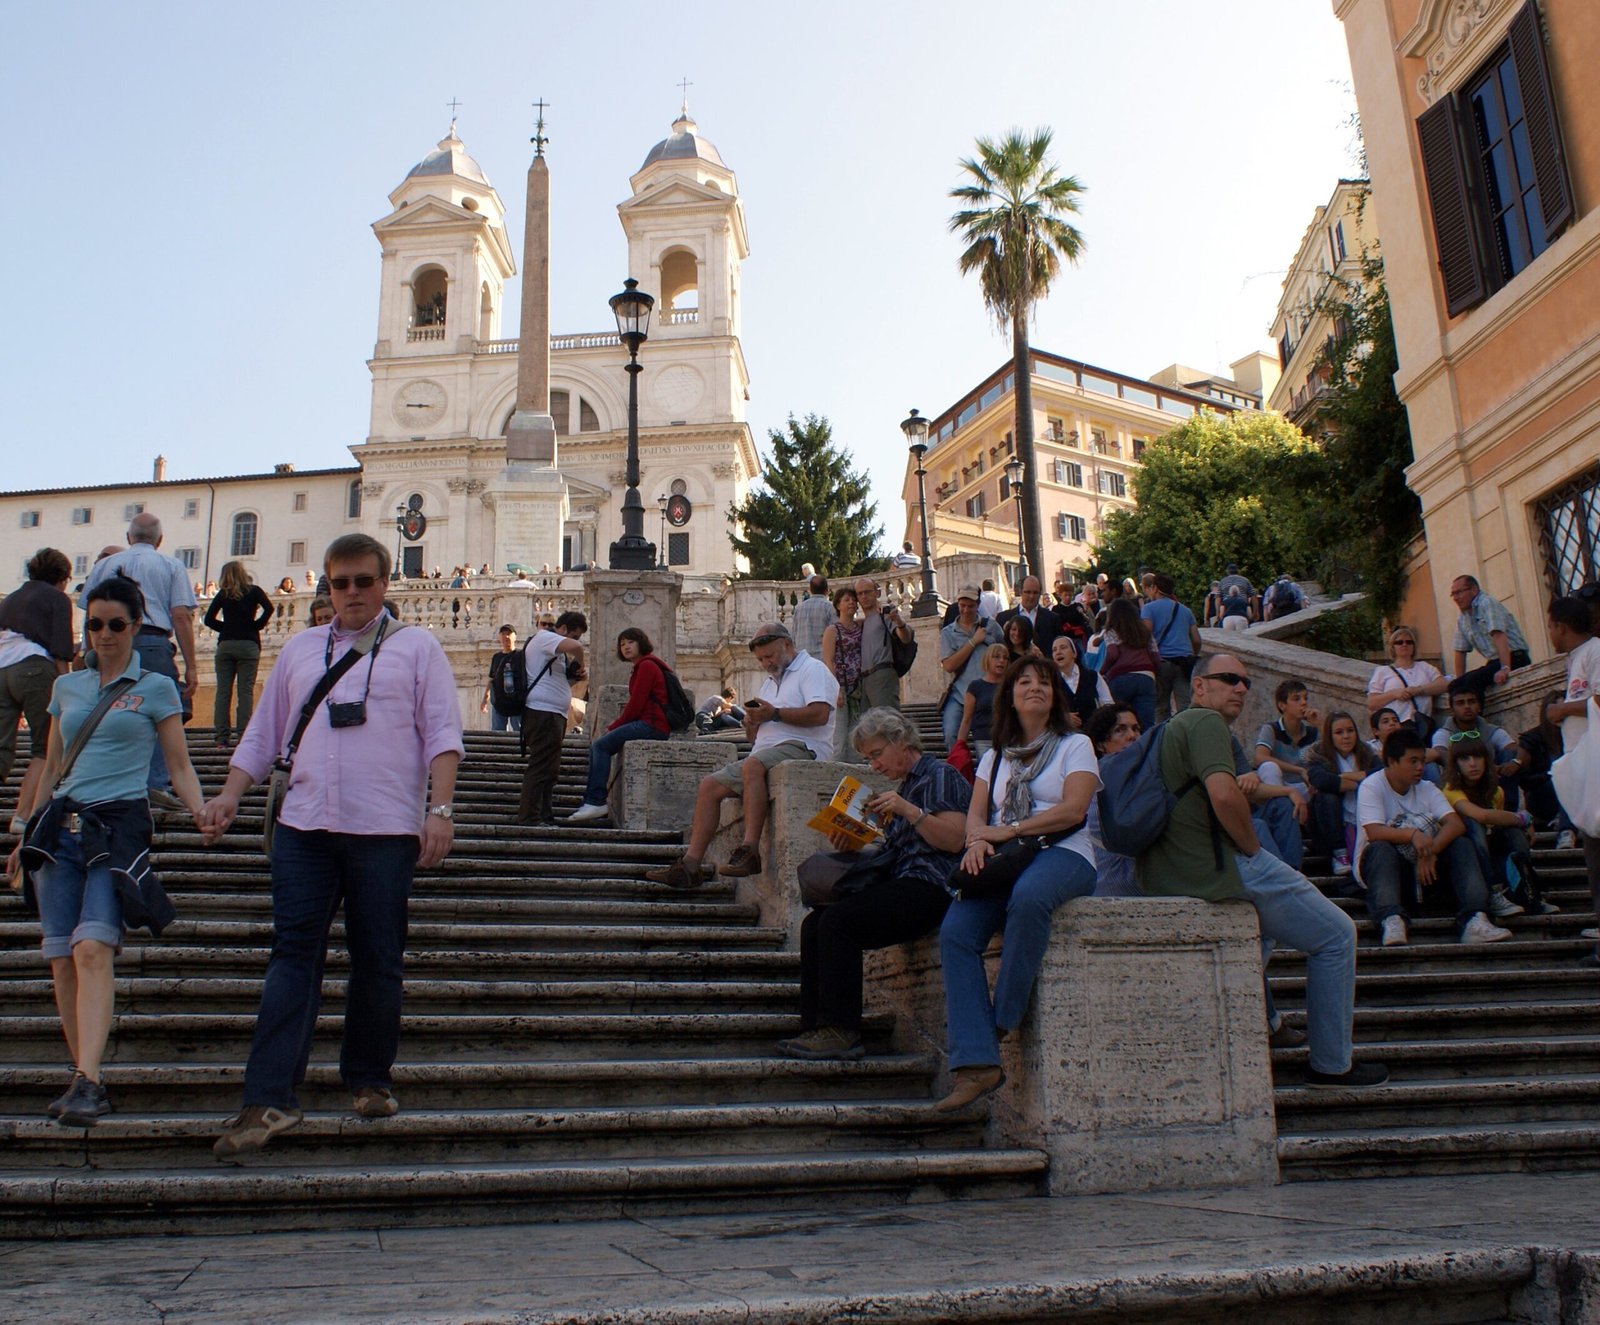 The Spanish Steps in Rome, Italy is a great place to relax. It is one of our 17 amazing sites to check out when in Rome.